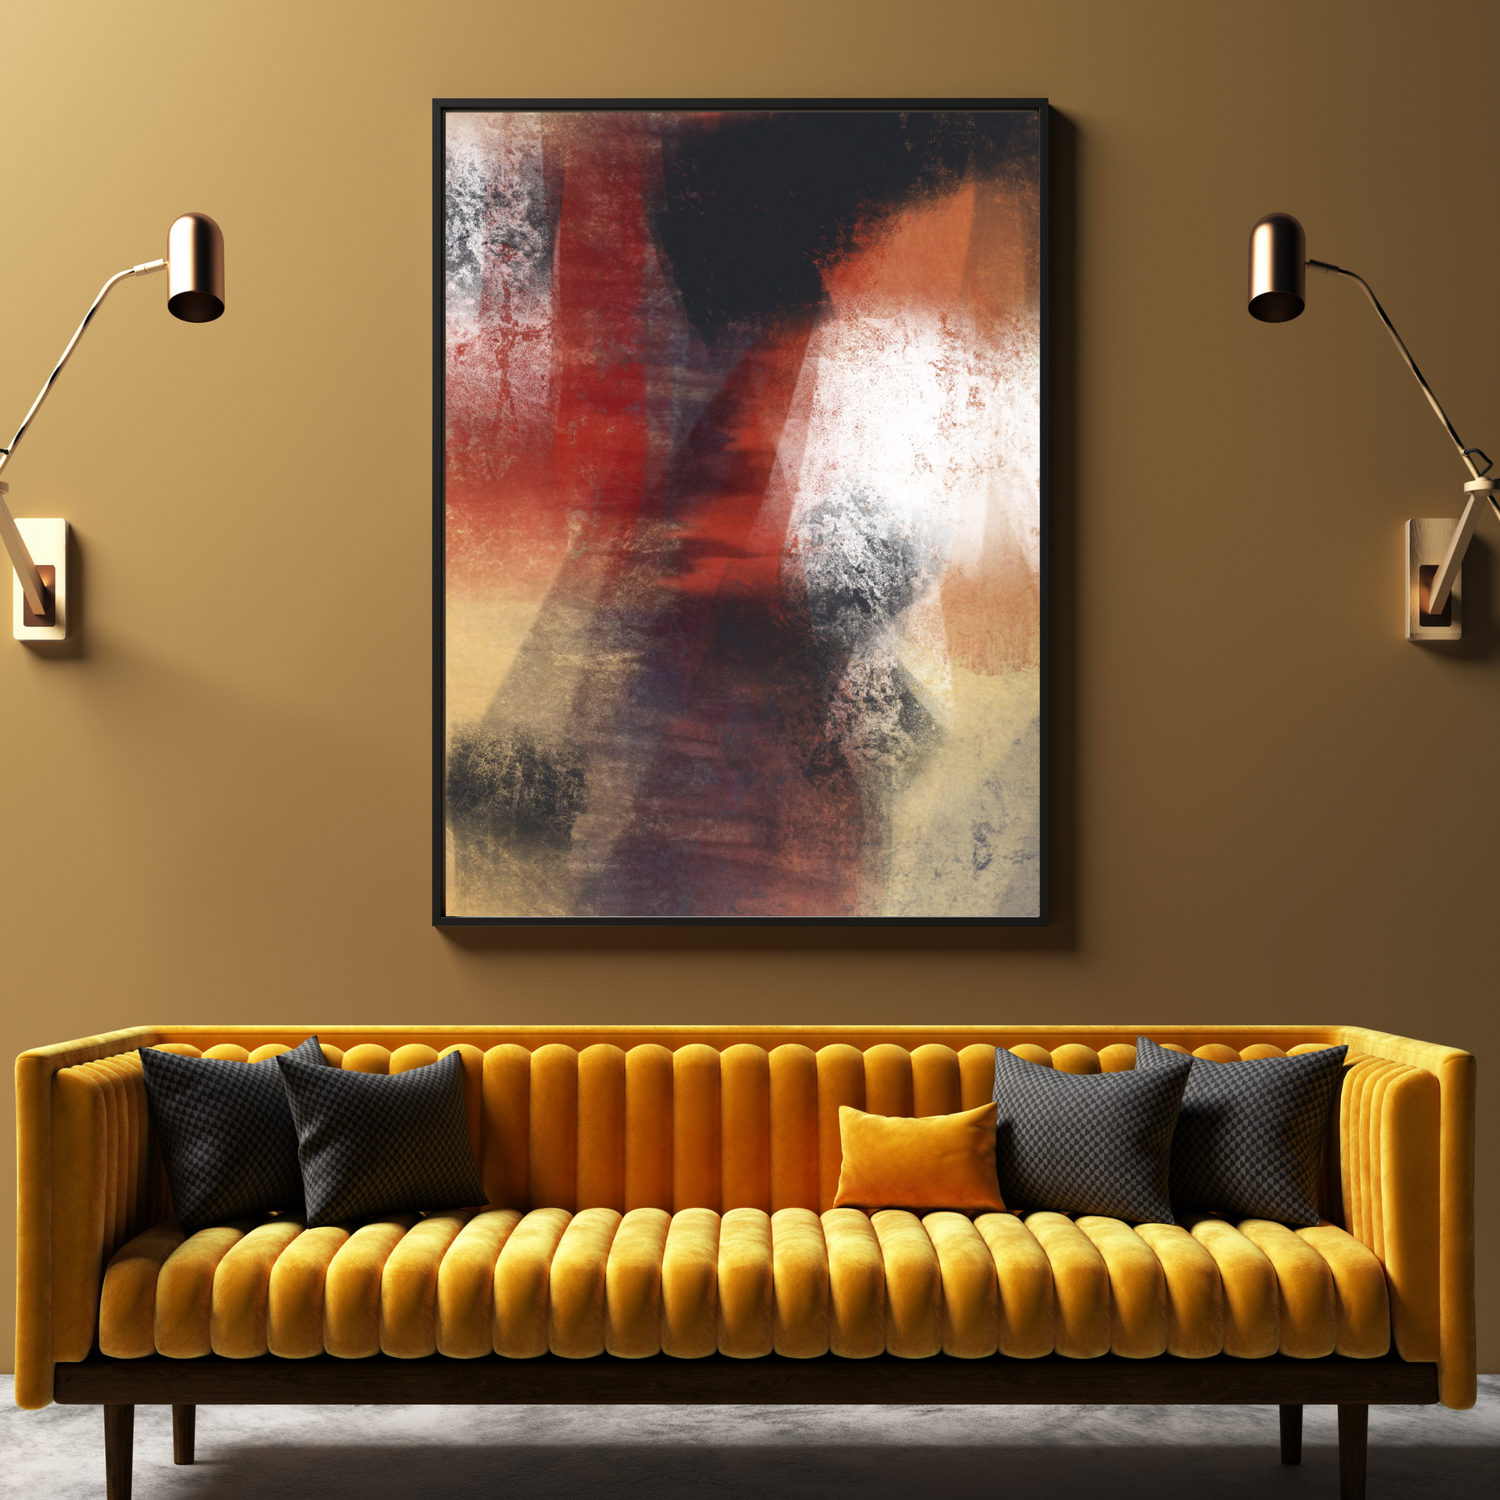 An example of the Red Light painting by ArisaTeam in a living room with warm colors.